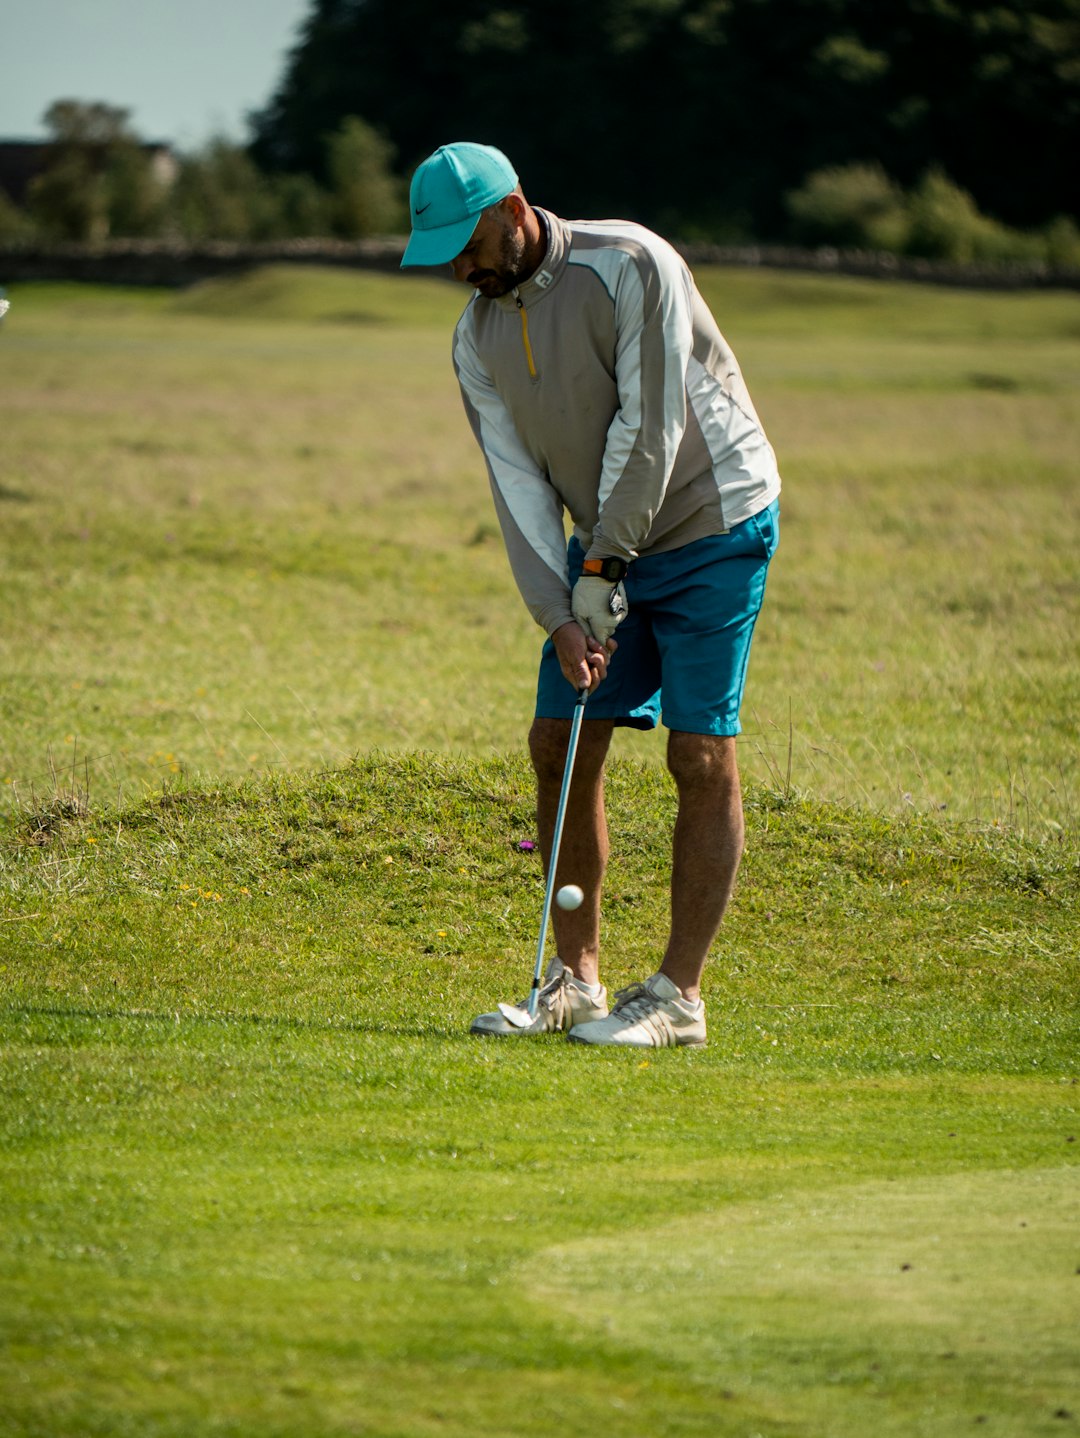 Golfers teeing off at a picturesque golf course, showcasing an exciting golfing event.